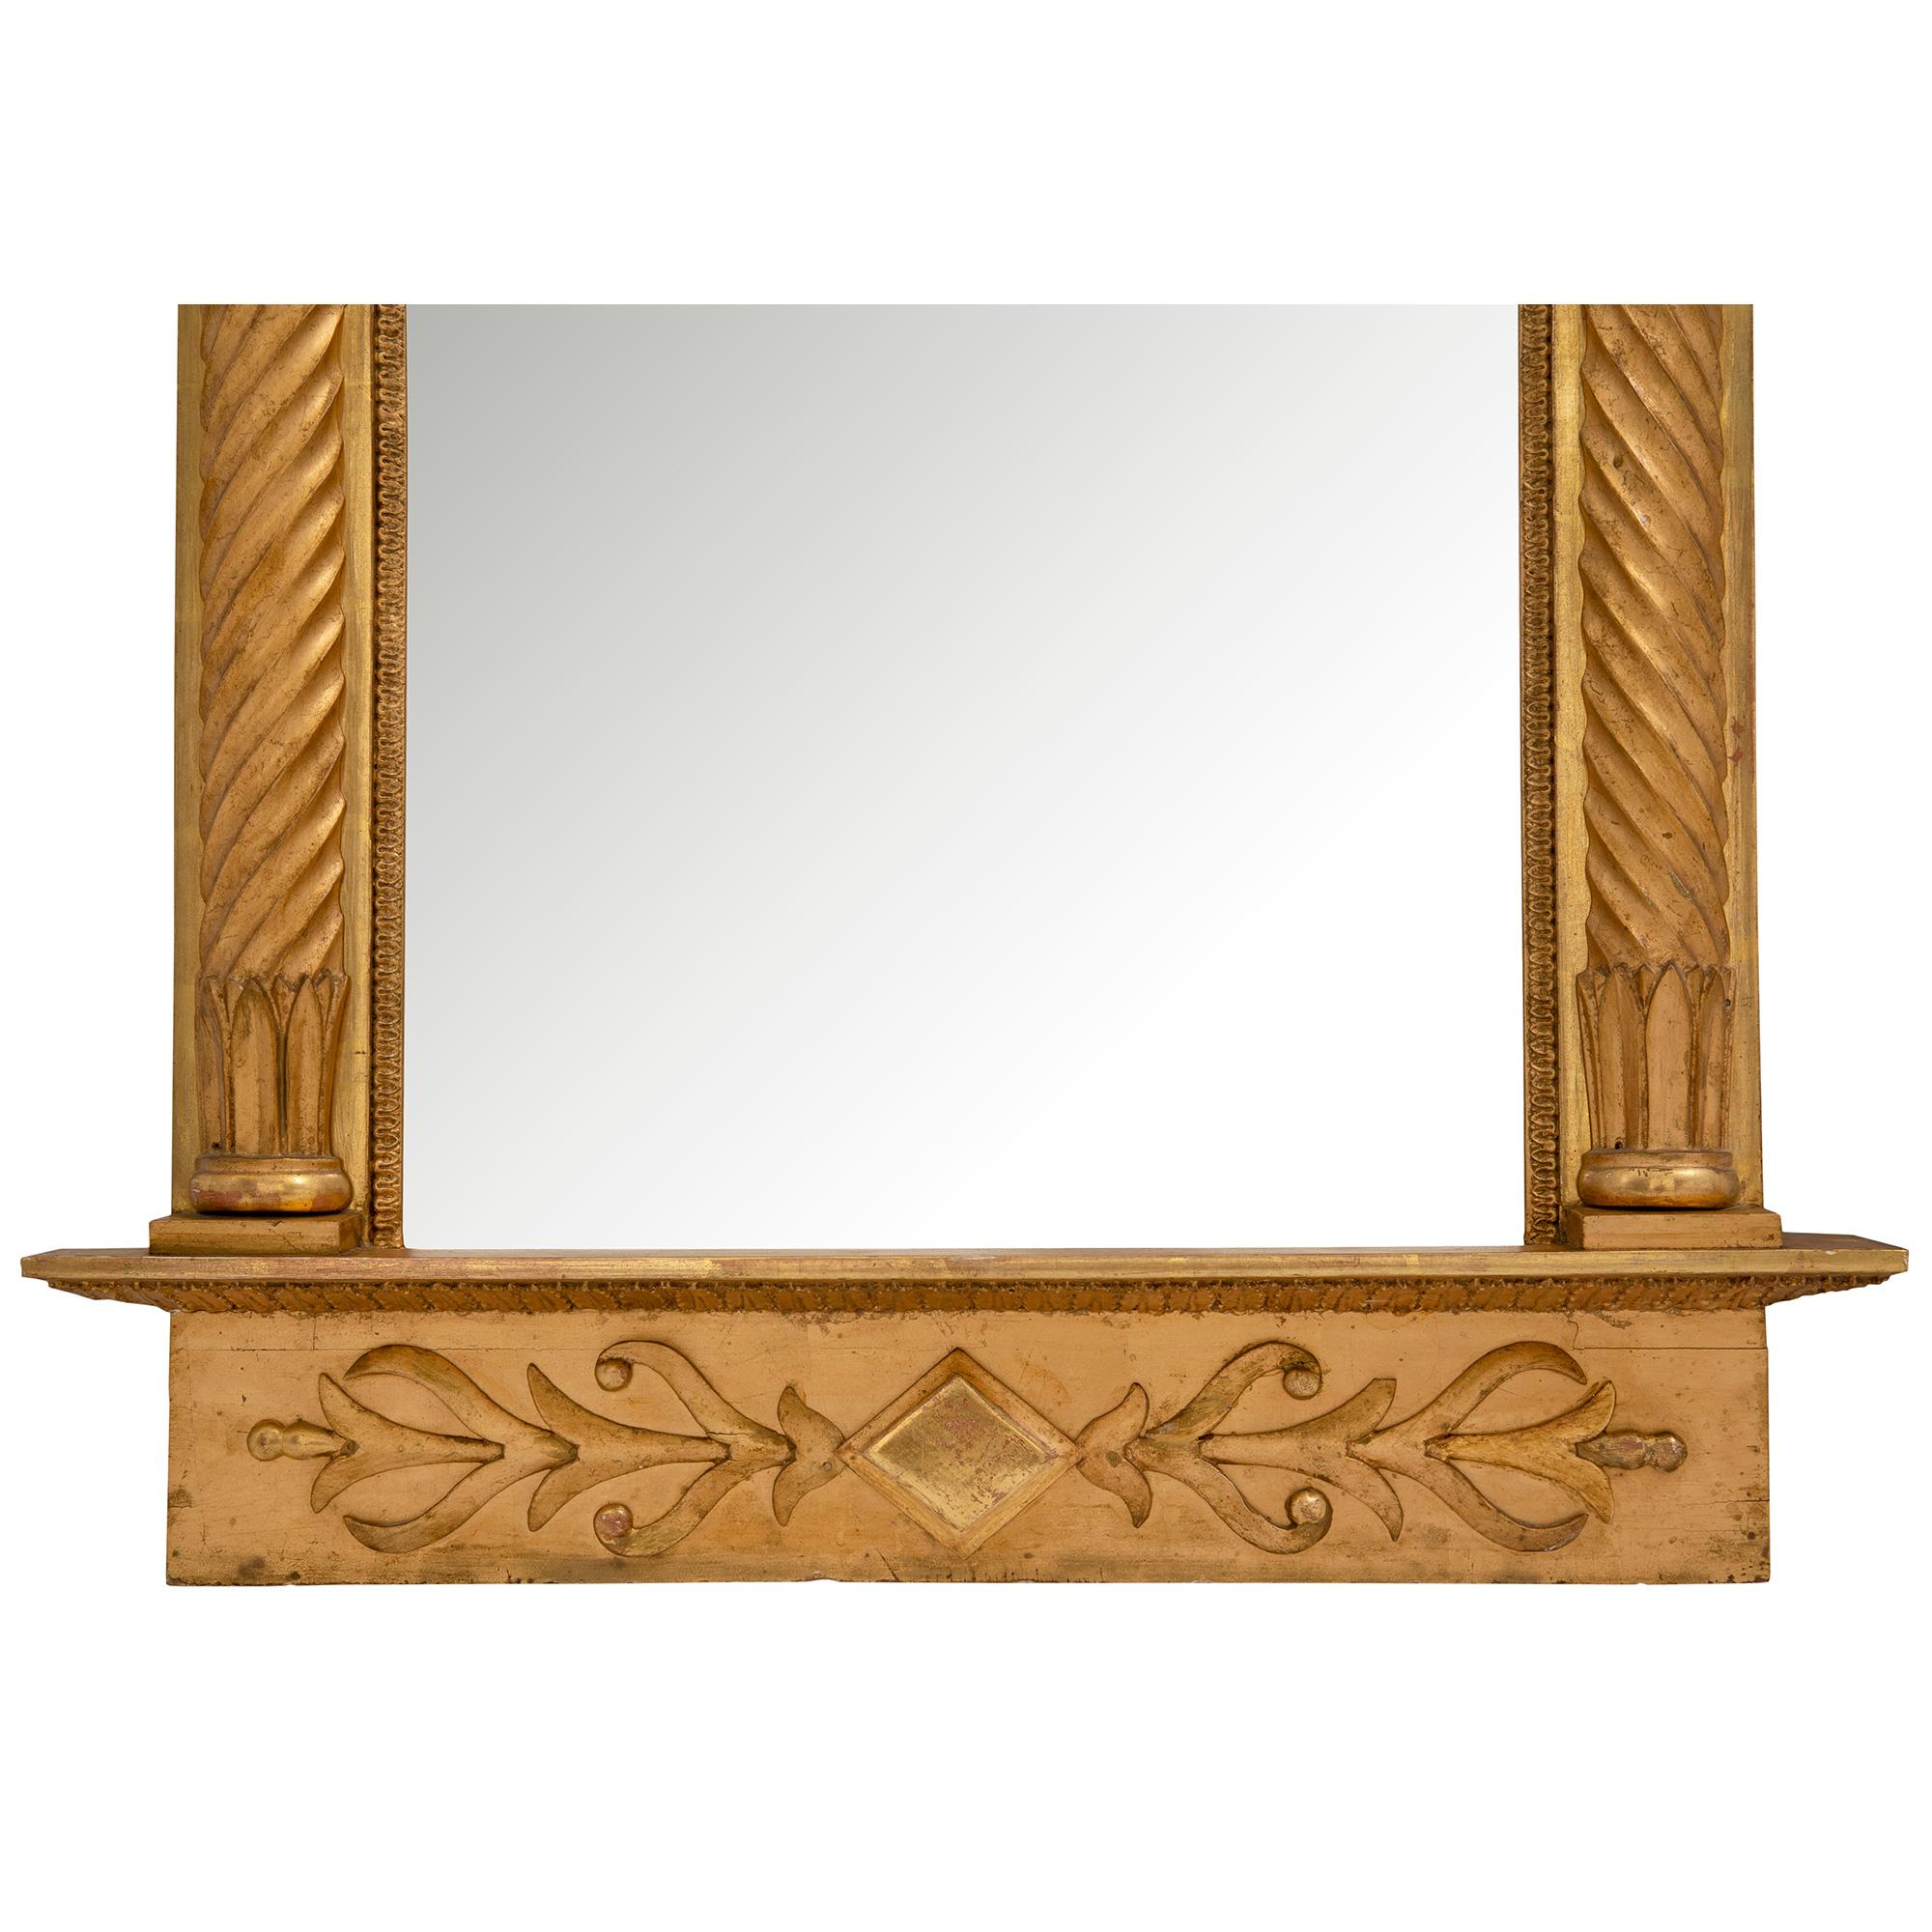 French 19th Century Neo-Classical Giltwood Mirror For Sale 3